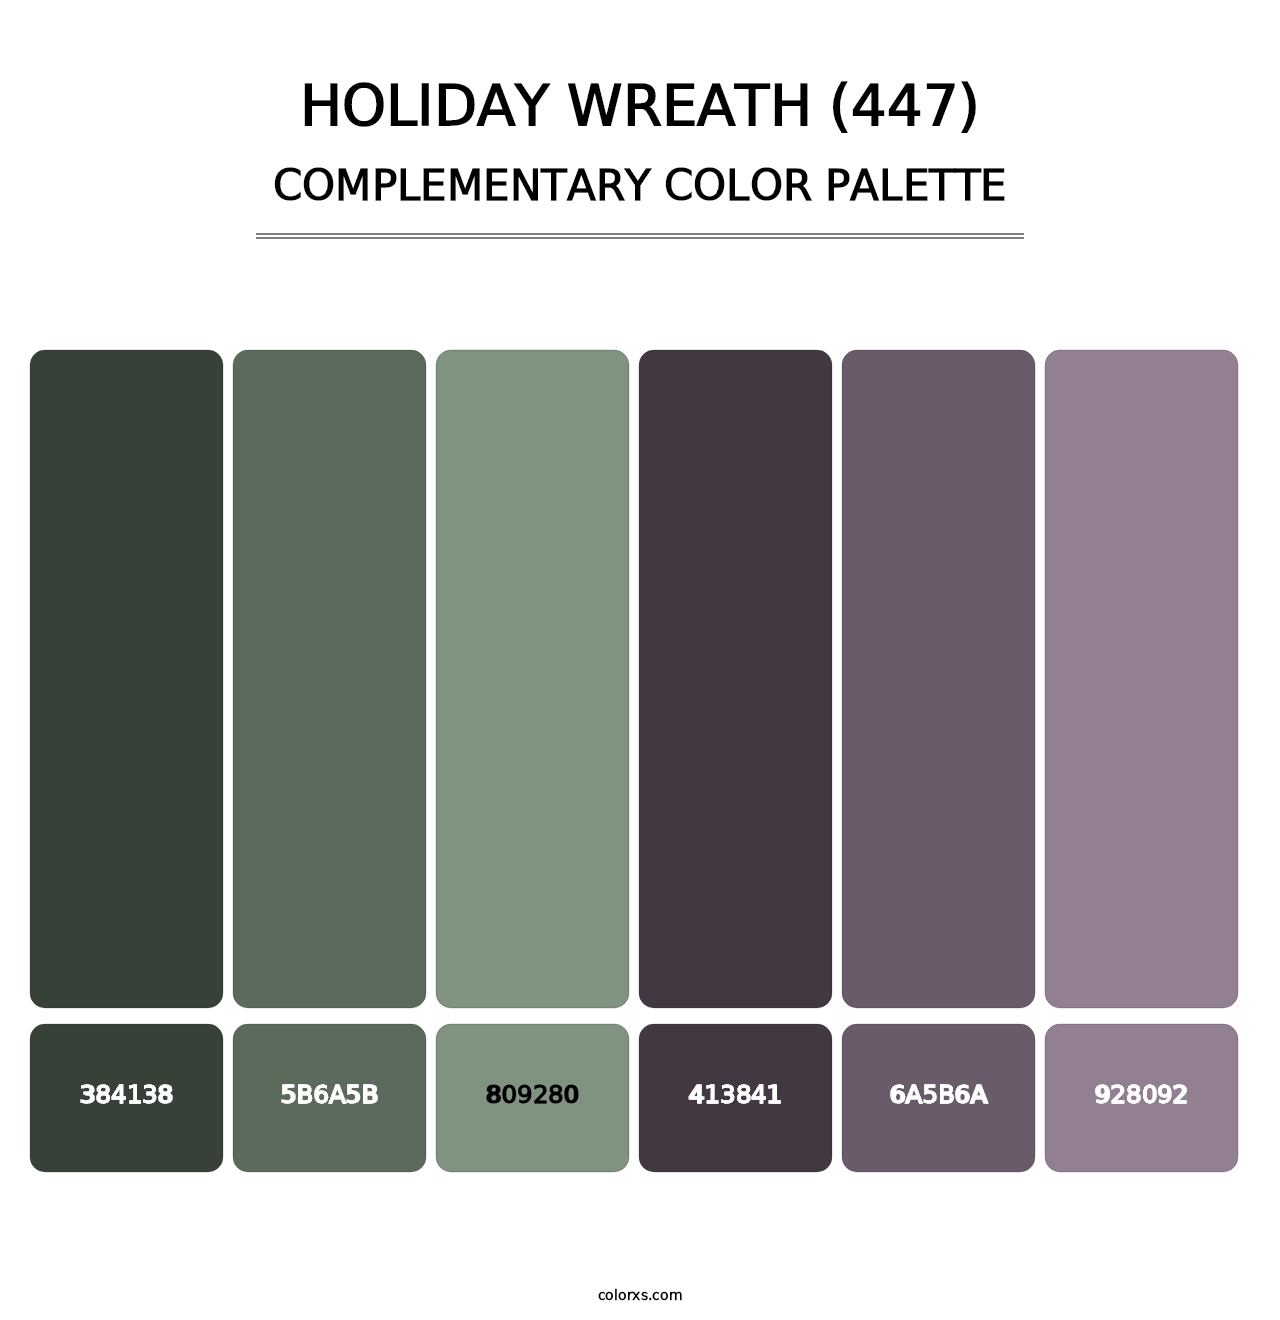 Holiday Wreath (447) - Complementary Color Palette